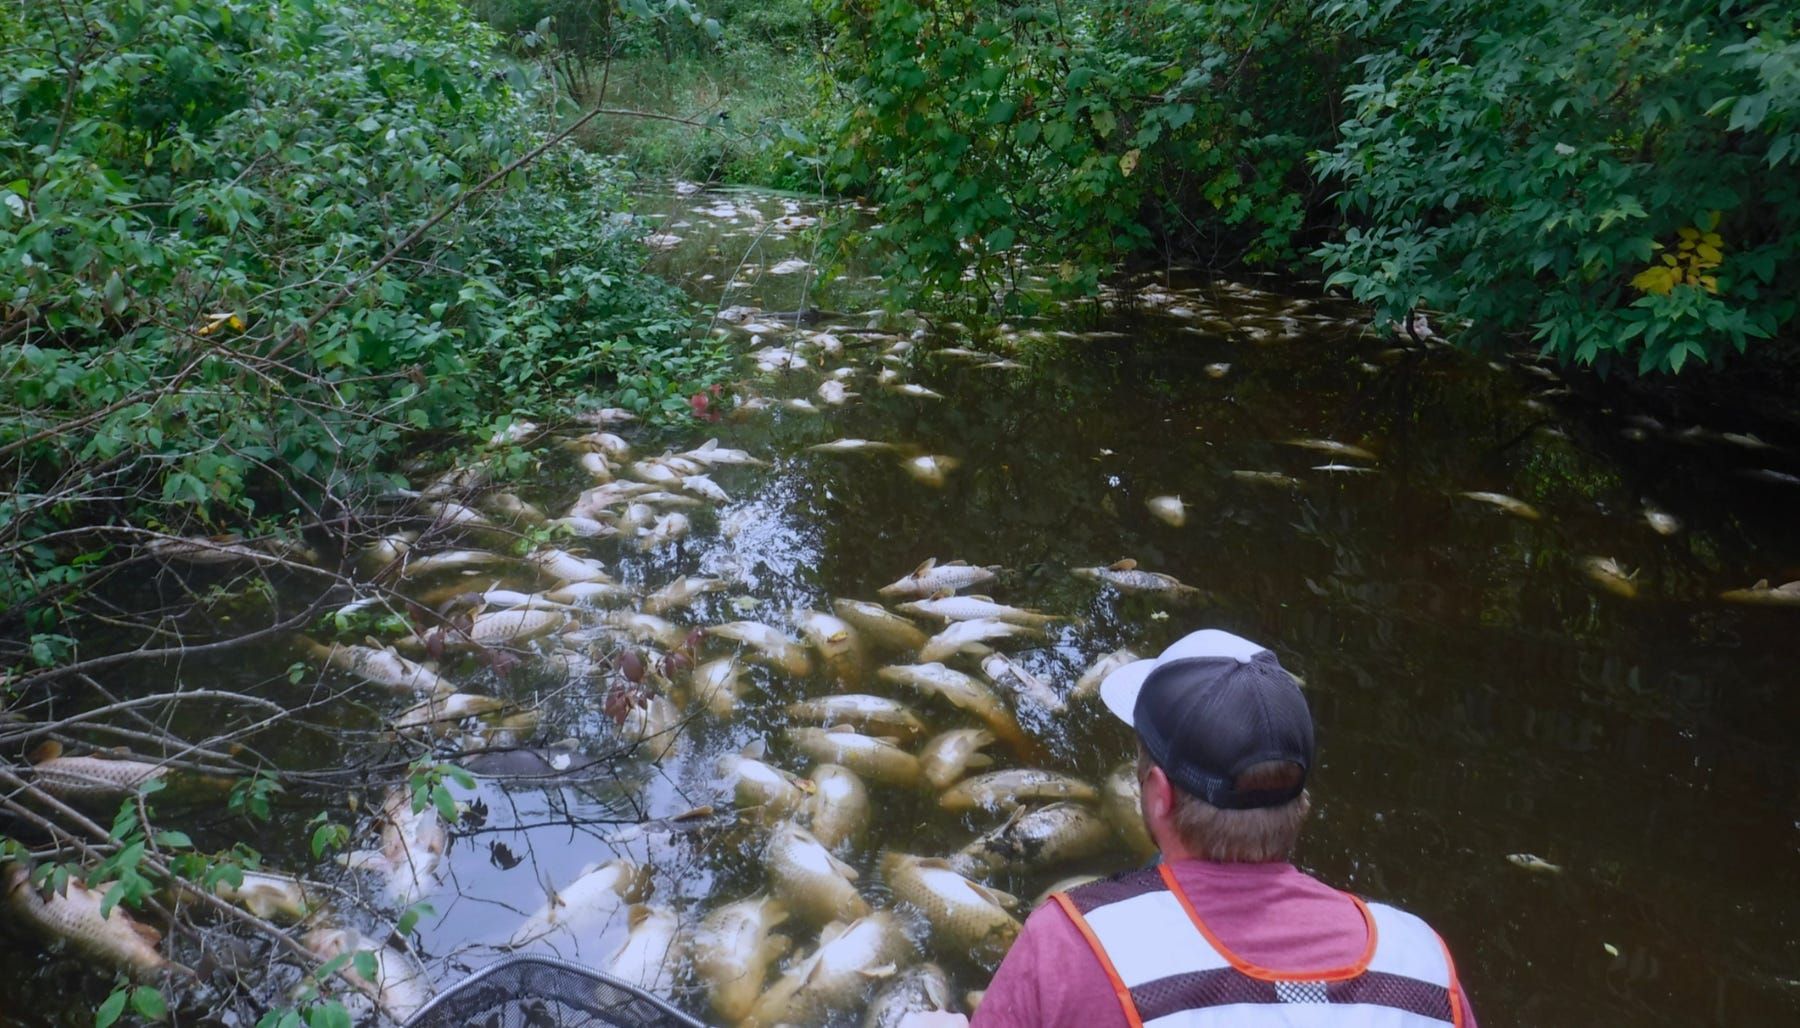 In August 2018, a combination of manure spreading and heavy rains damaged miles of the Sheboygan River, killing fish. Image by Ben Uvaas / Wisconsin DNR. United States, 2018.